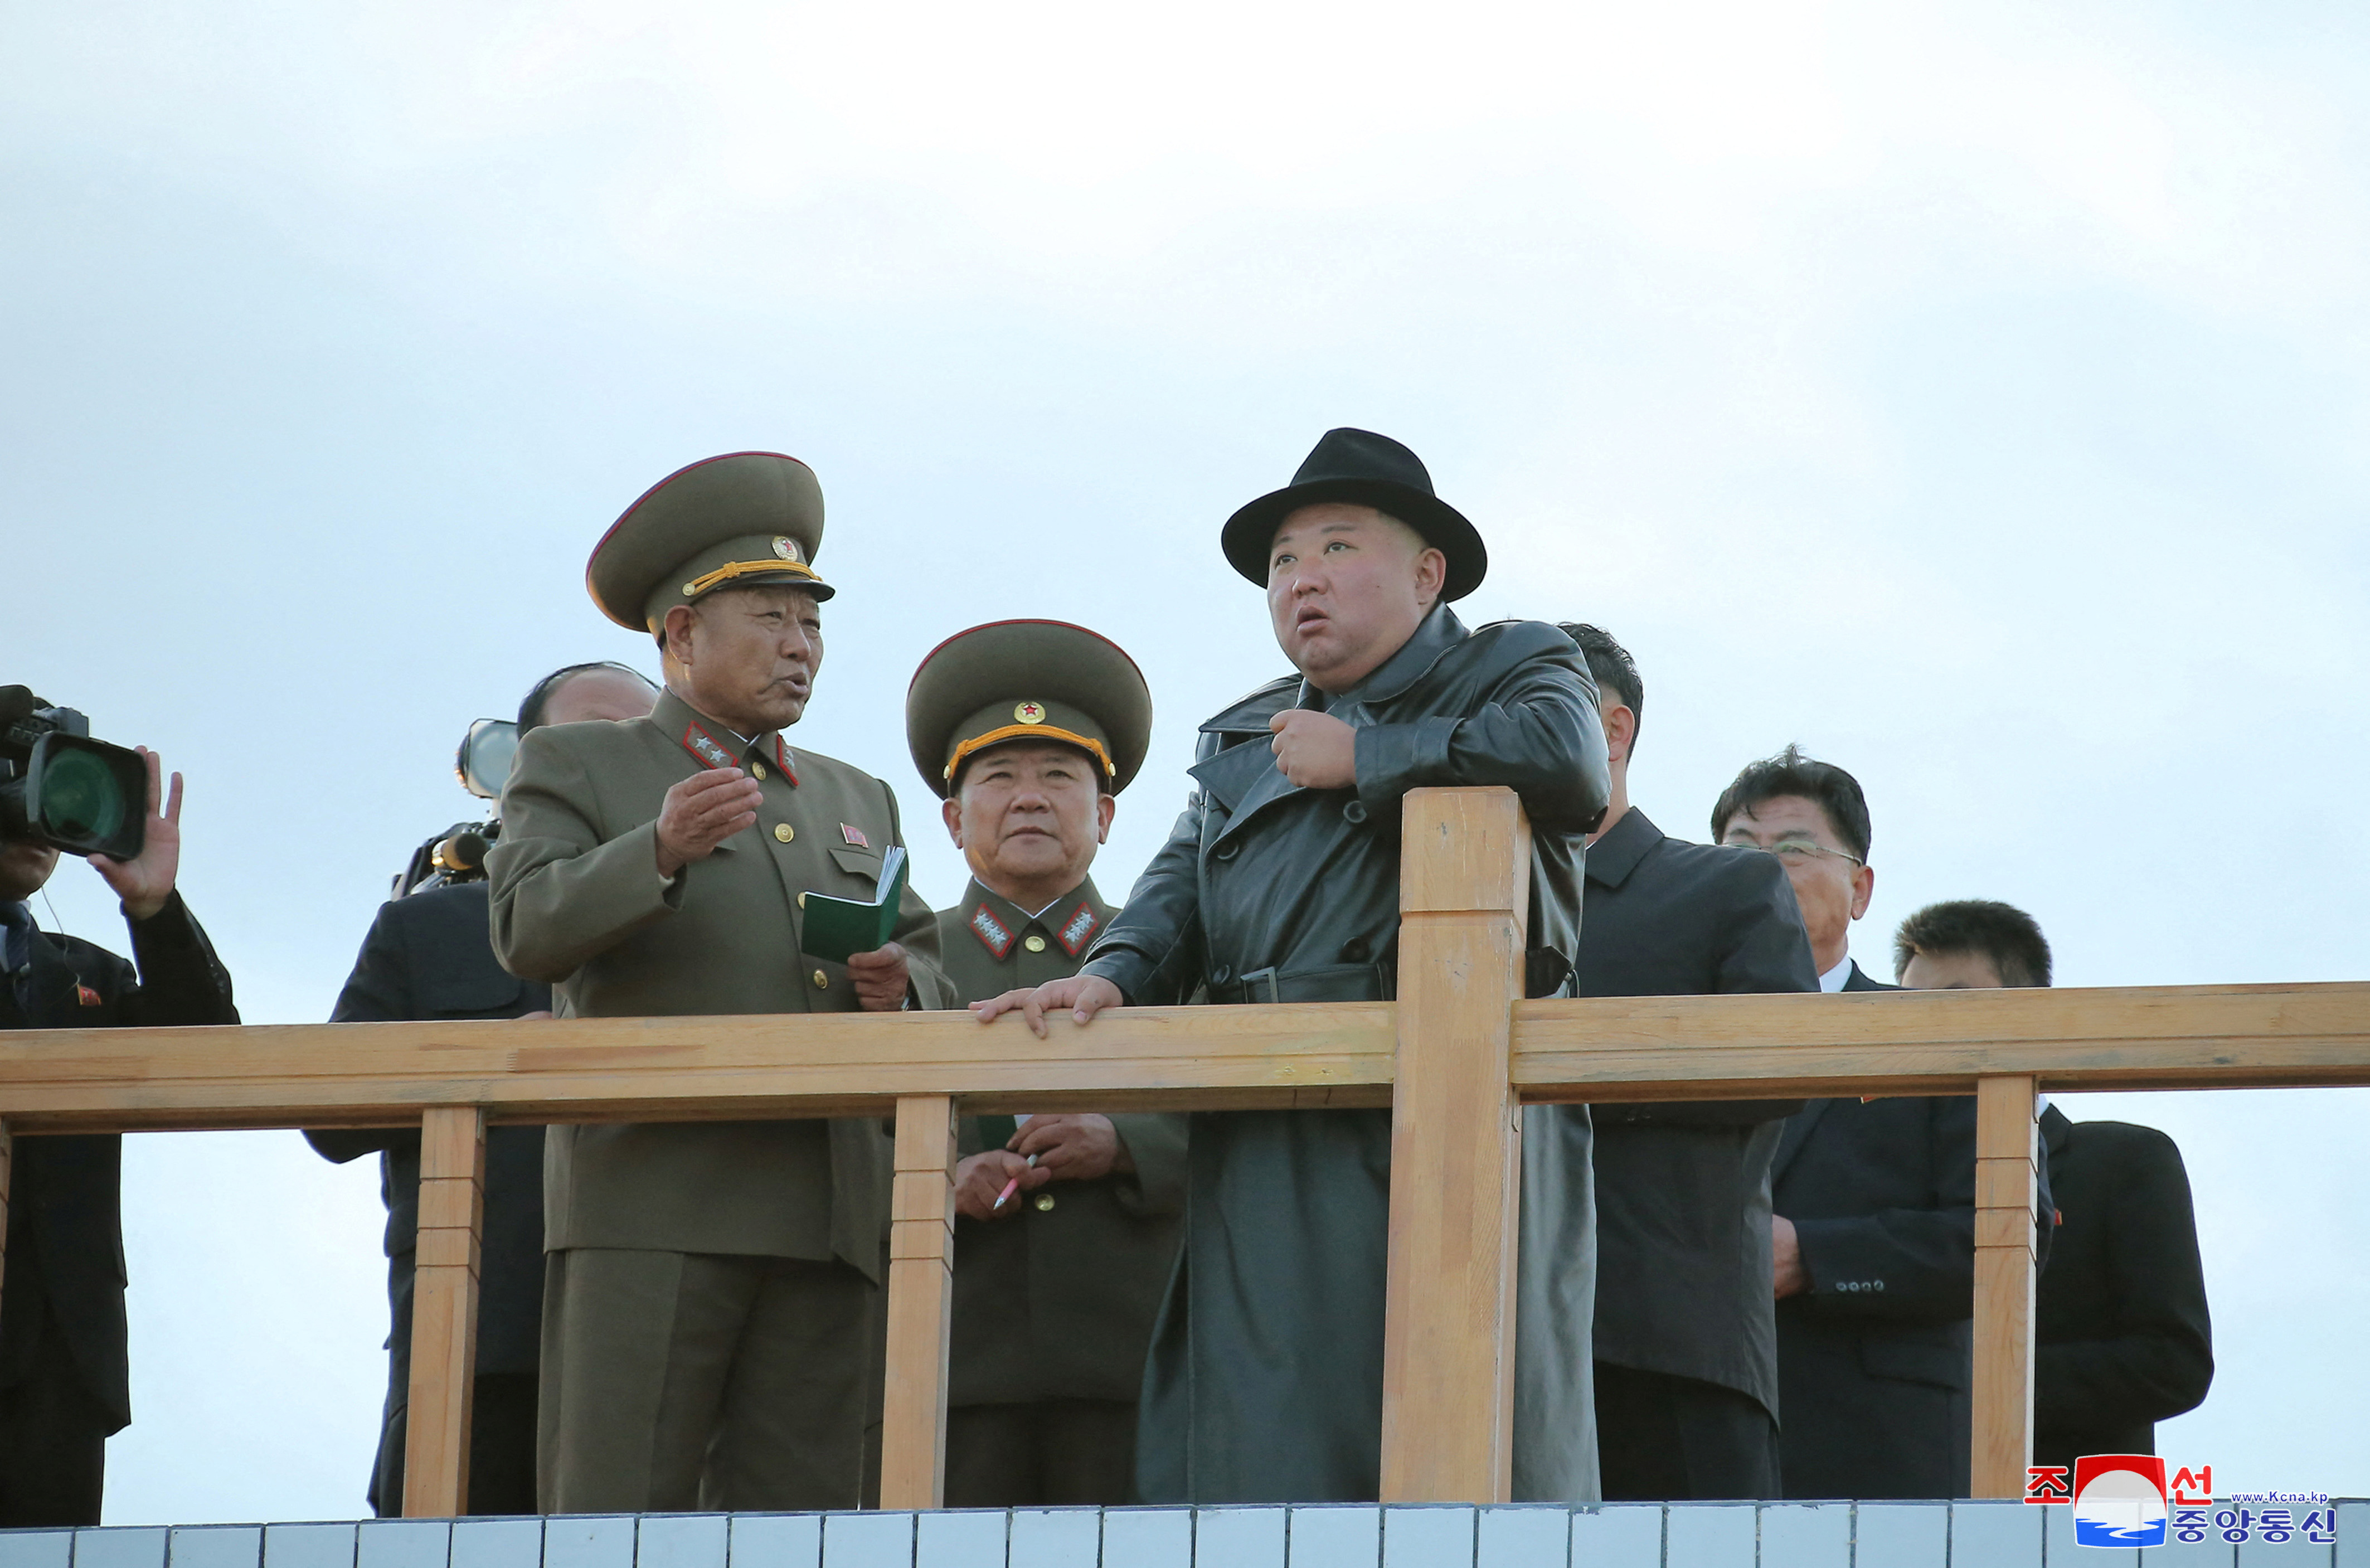 North Korea's leader Kim Jong Un attends the opening ceremony of the Ryonpho Greenhouse Farm